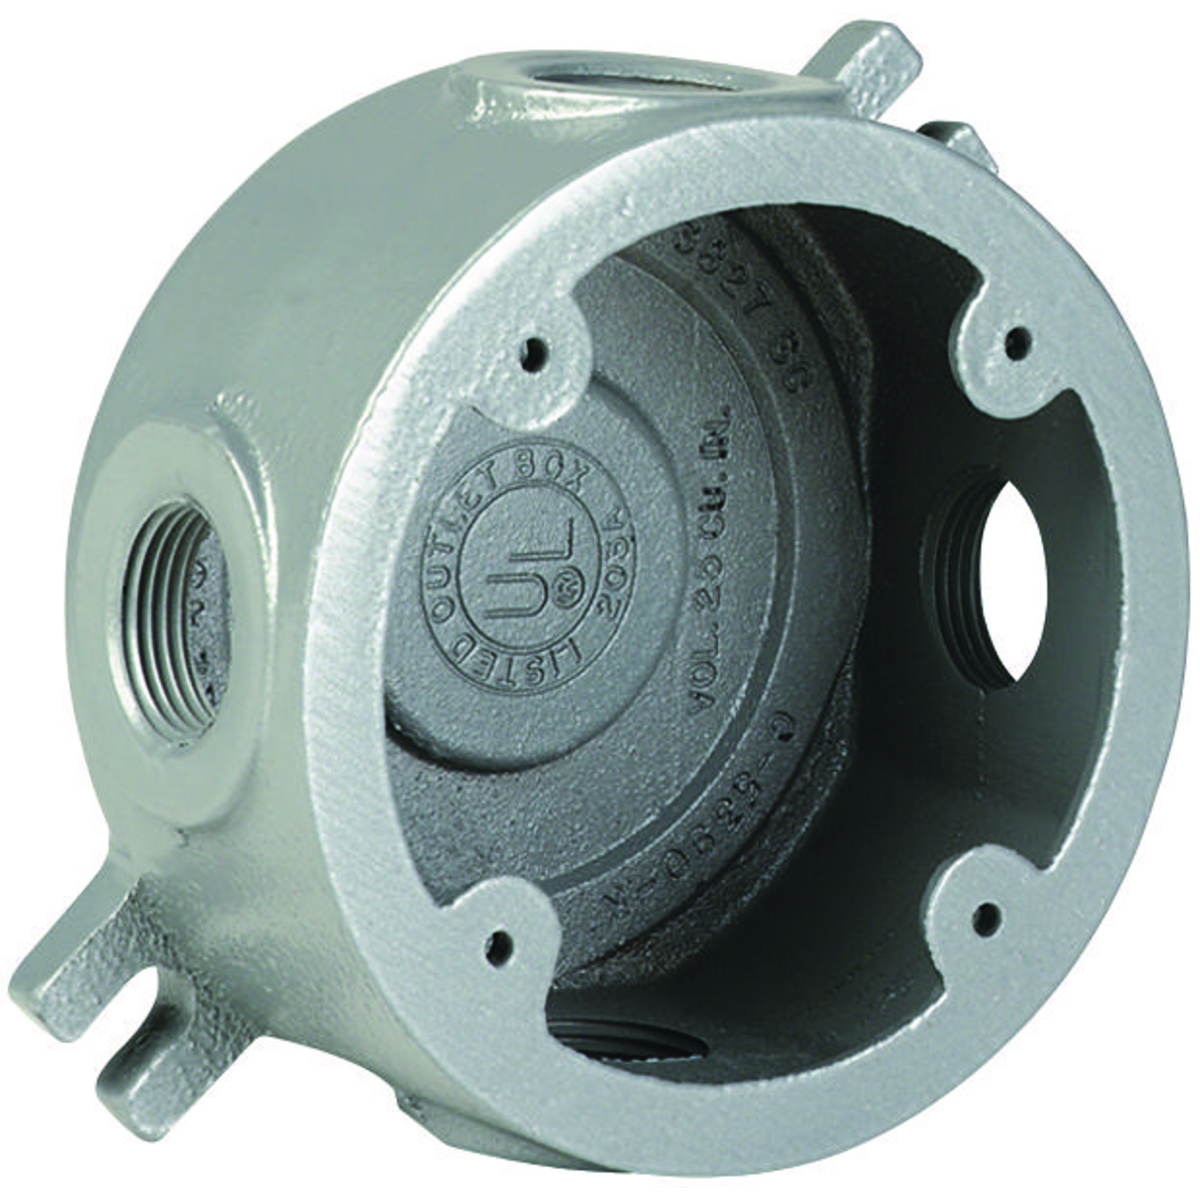 ROUND OUTLET 2-1/4" 1/2" HUB